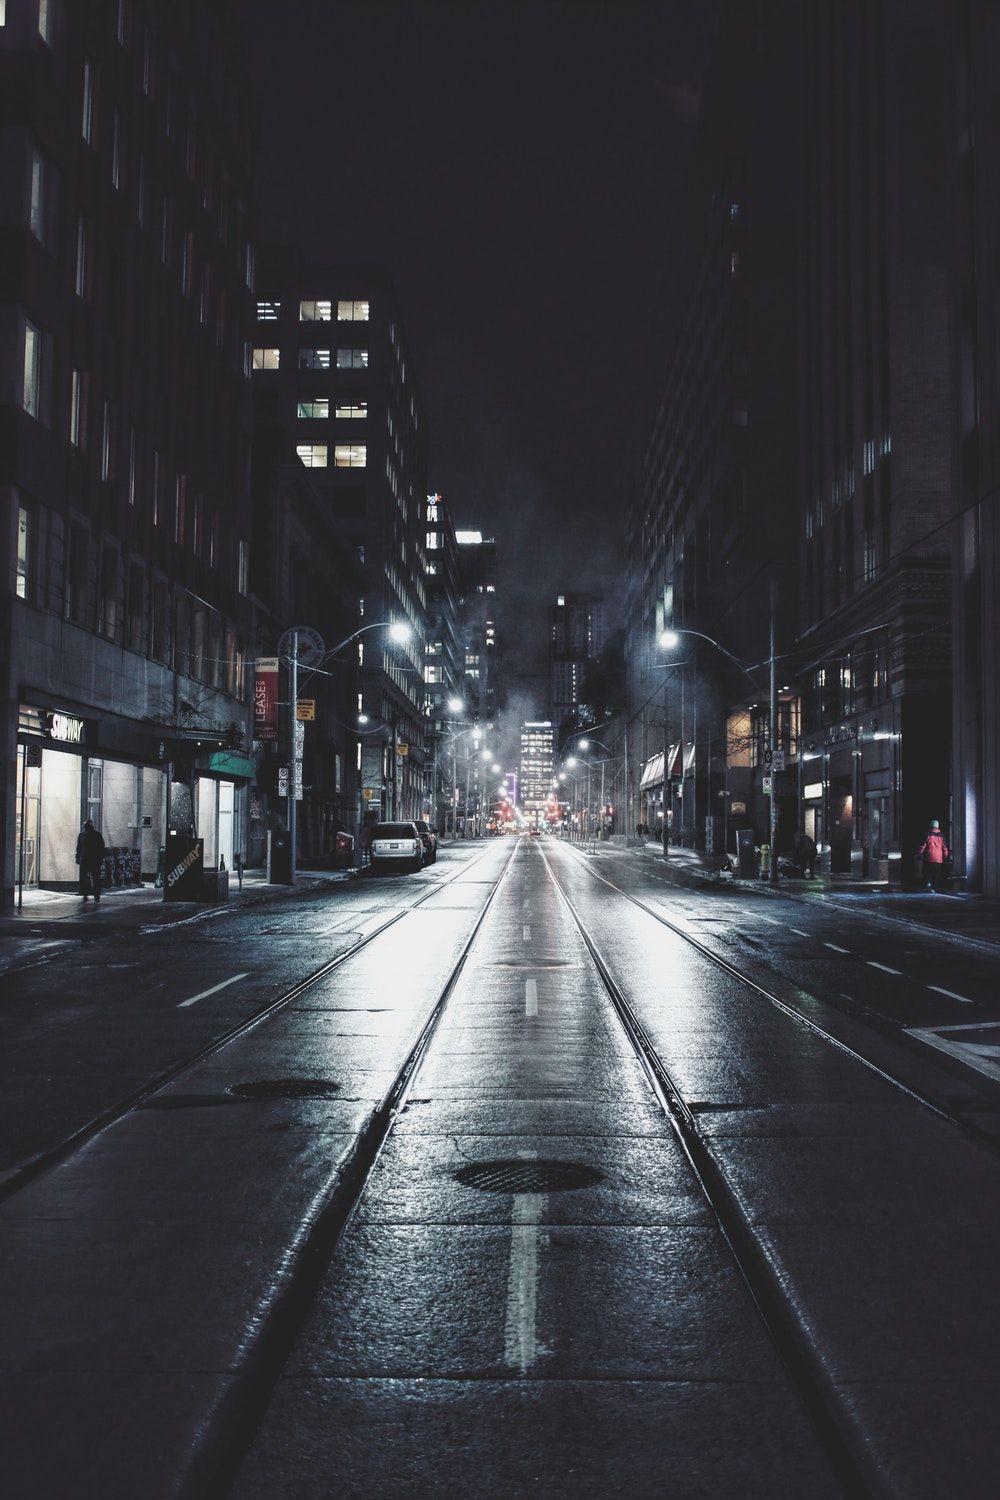 City Street Picture. Download Free Image